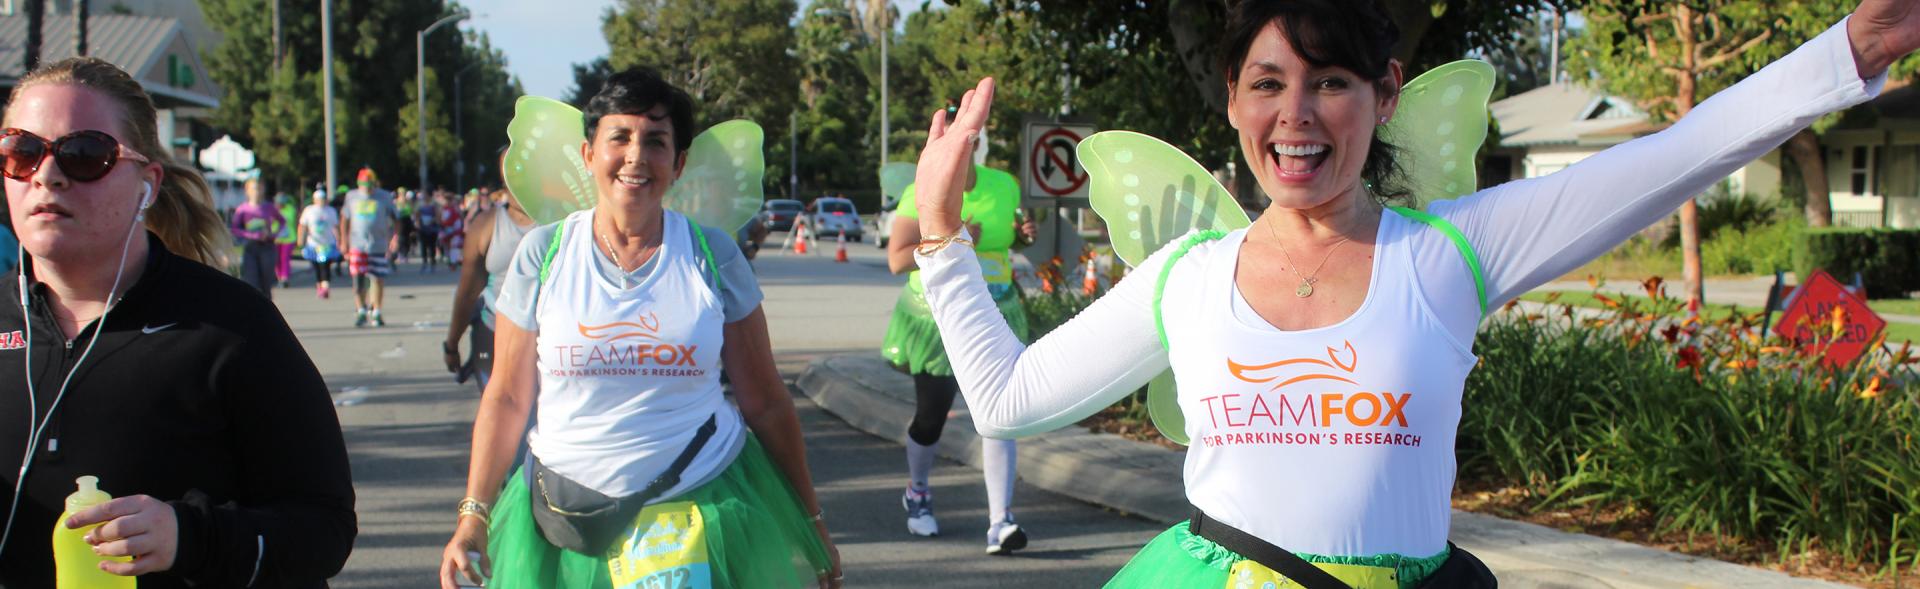 Two females in fairy costumes at a Team Fox event.